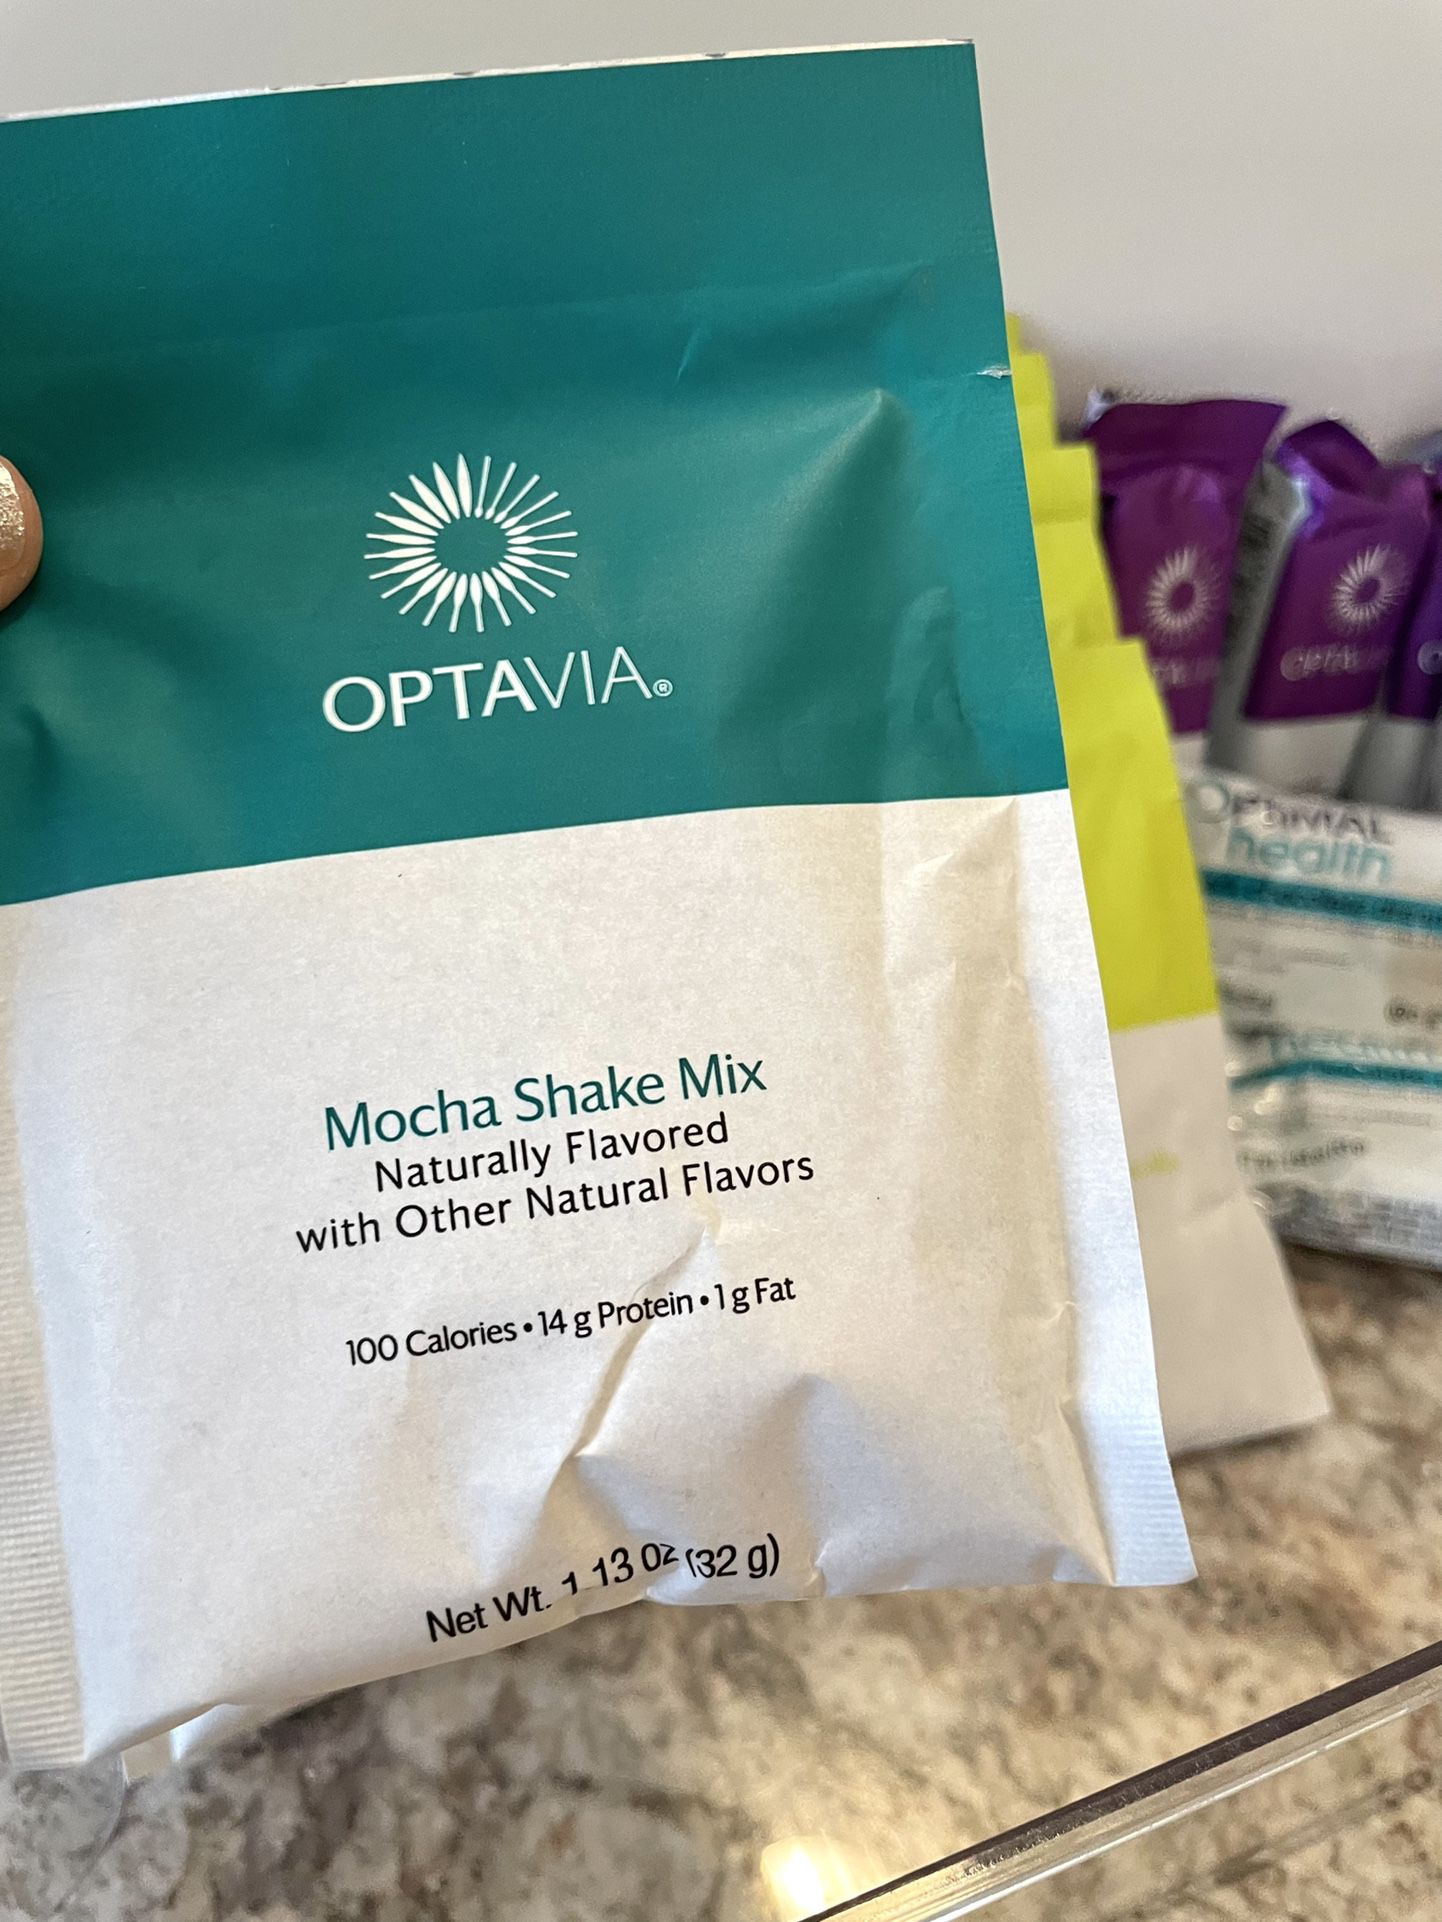 Optavia Weight Loss Products for Sale in El Paso, TX - OfferUp